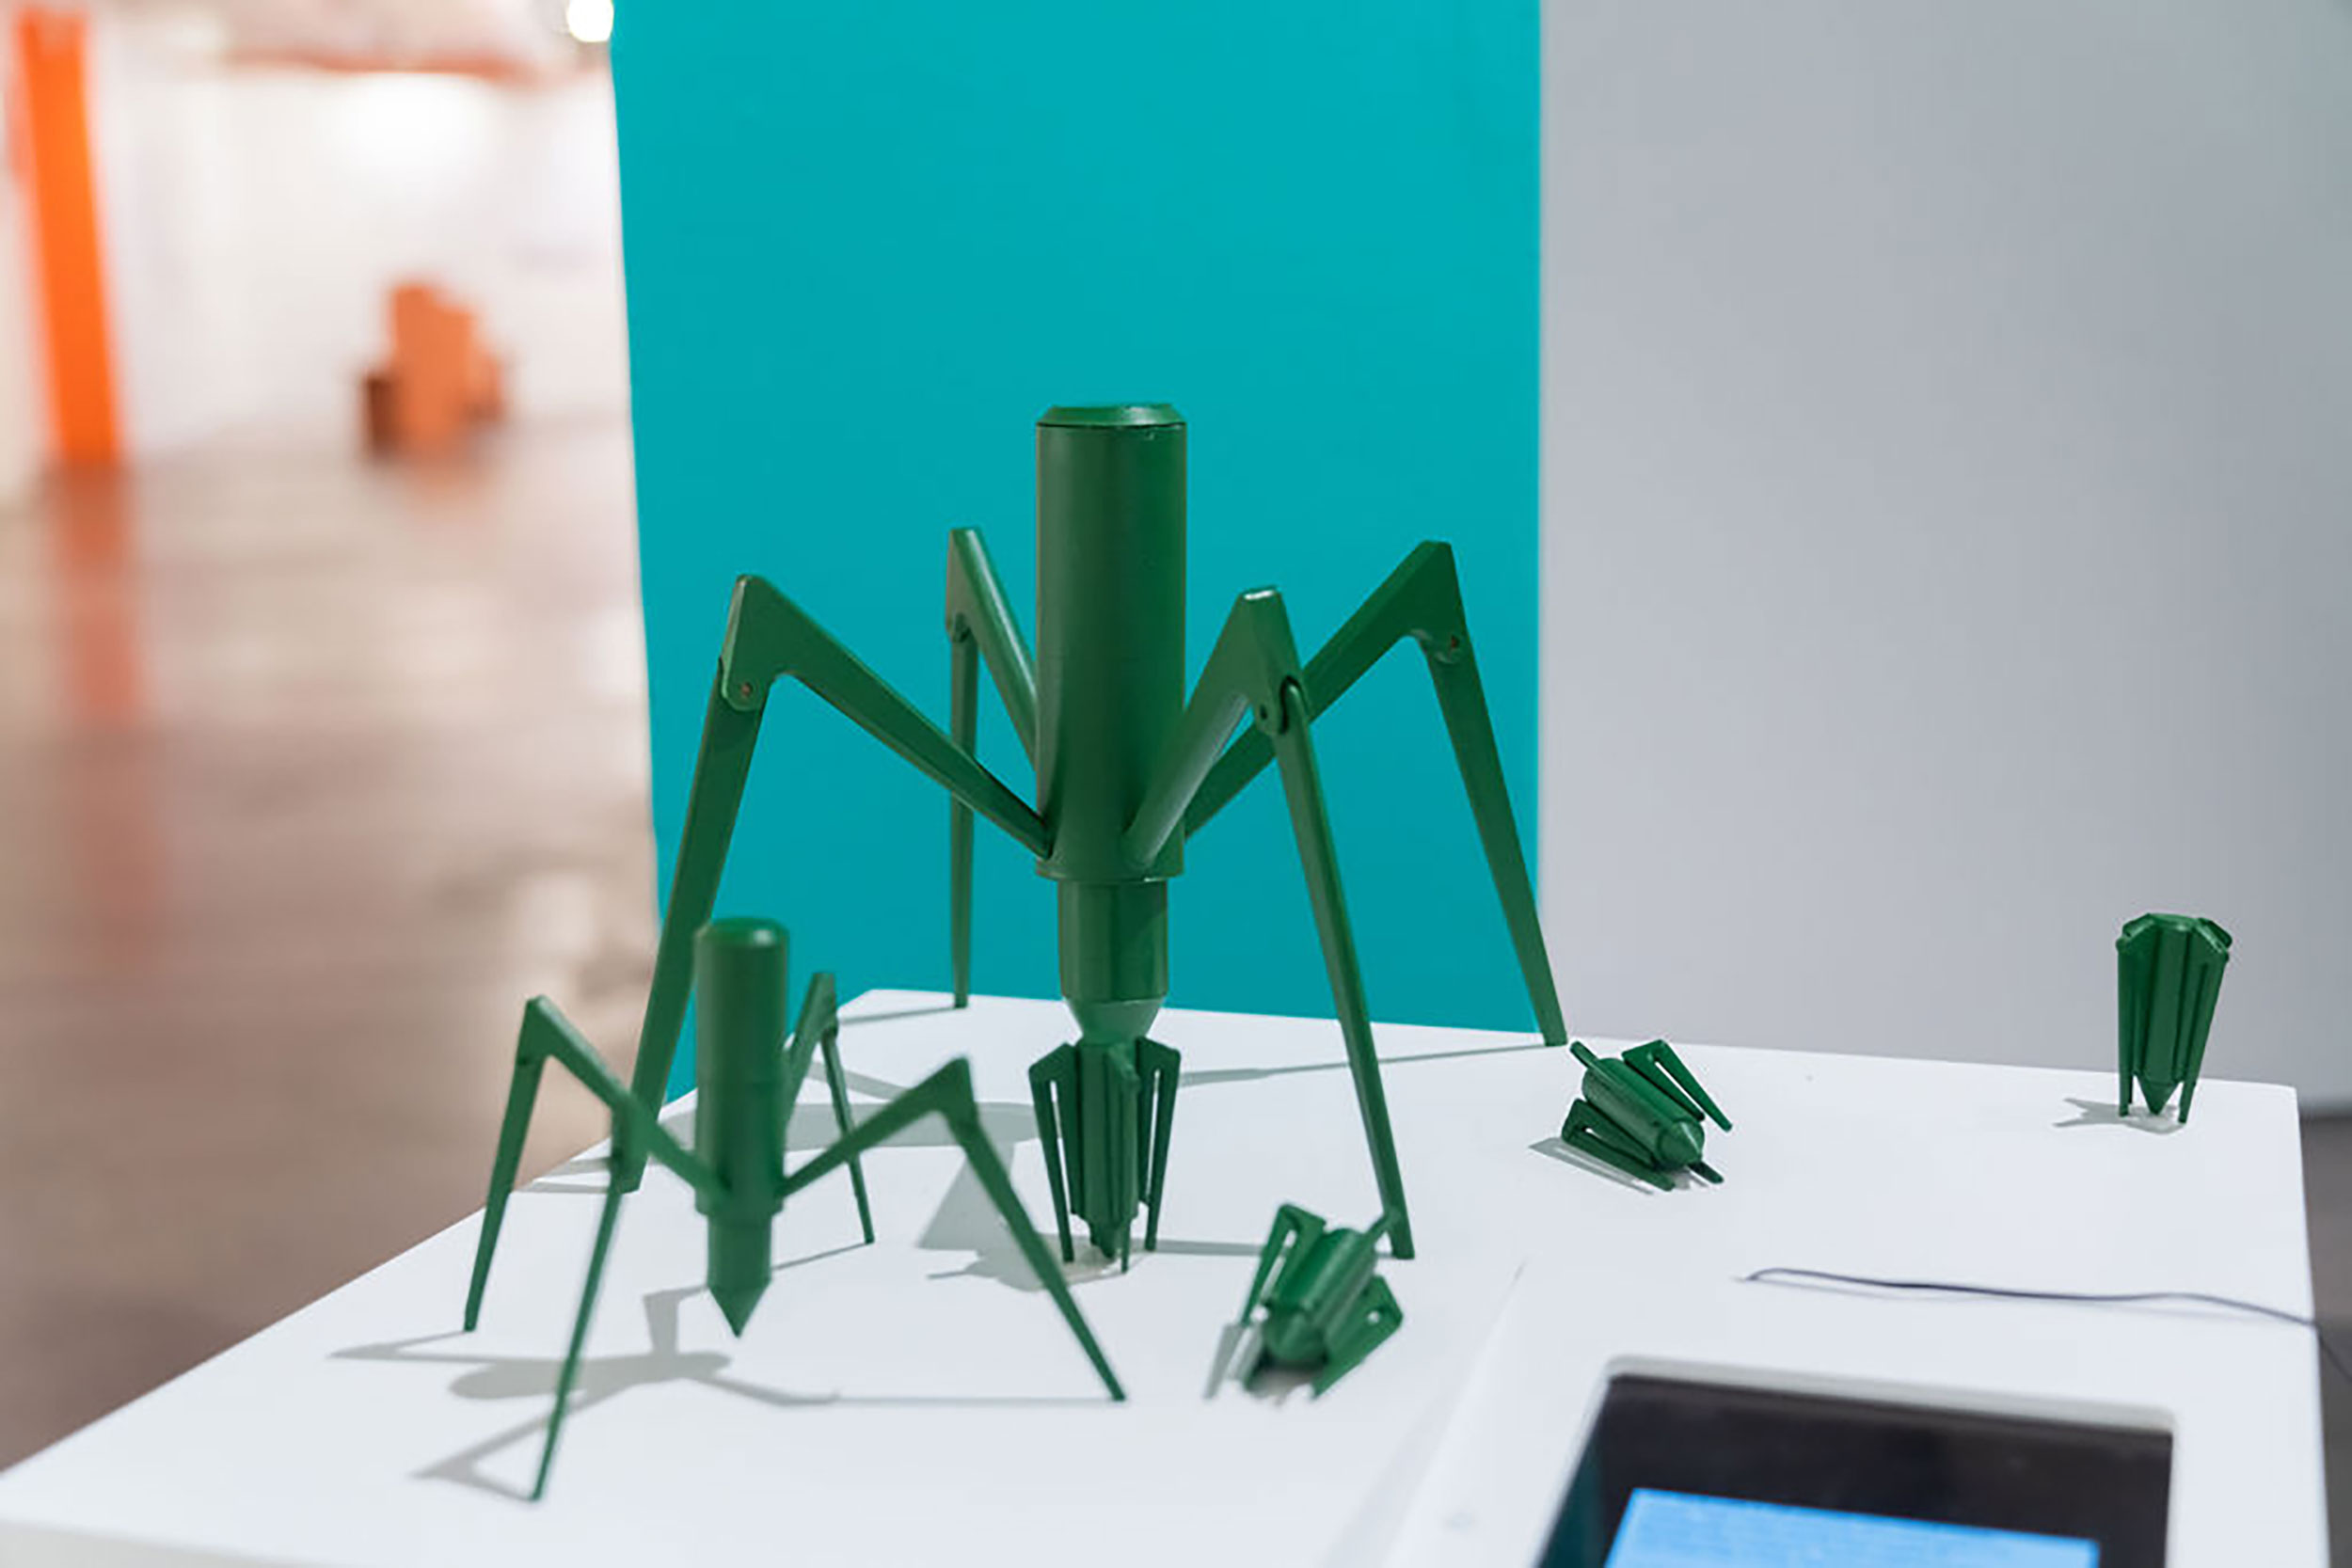 Installation view of small green objects on a white surface against a blue and white wall.